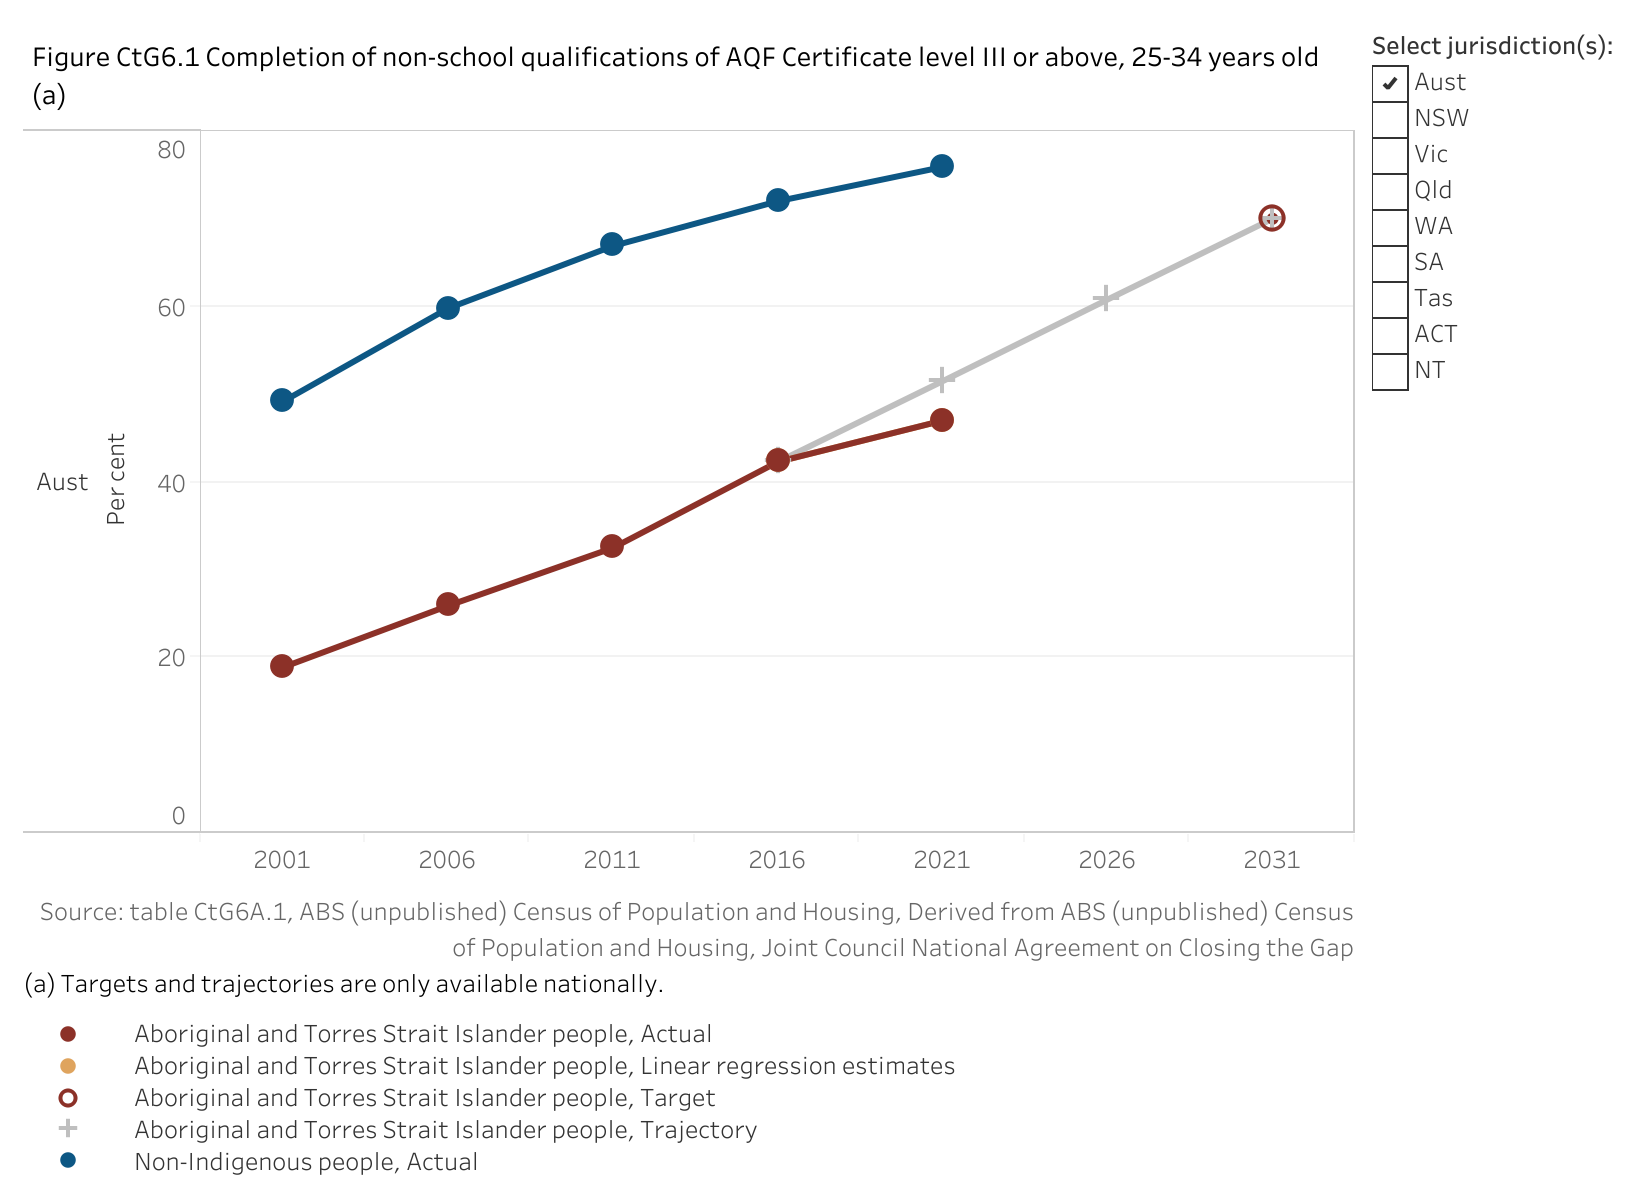 Figure CtG6.1 shows the completion of non-school qualifications of Australian Qualifications Framework Certificate level III or above, 25-34 years old. More details can be found within the text near this image.